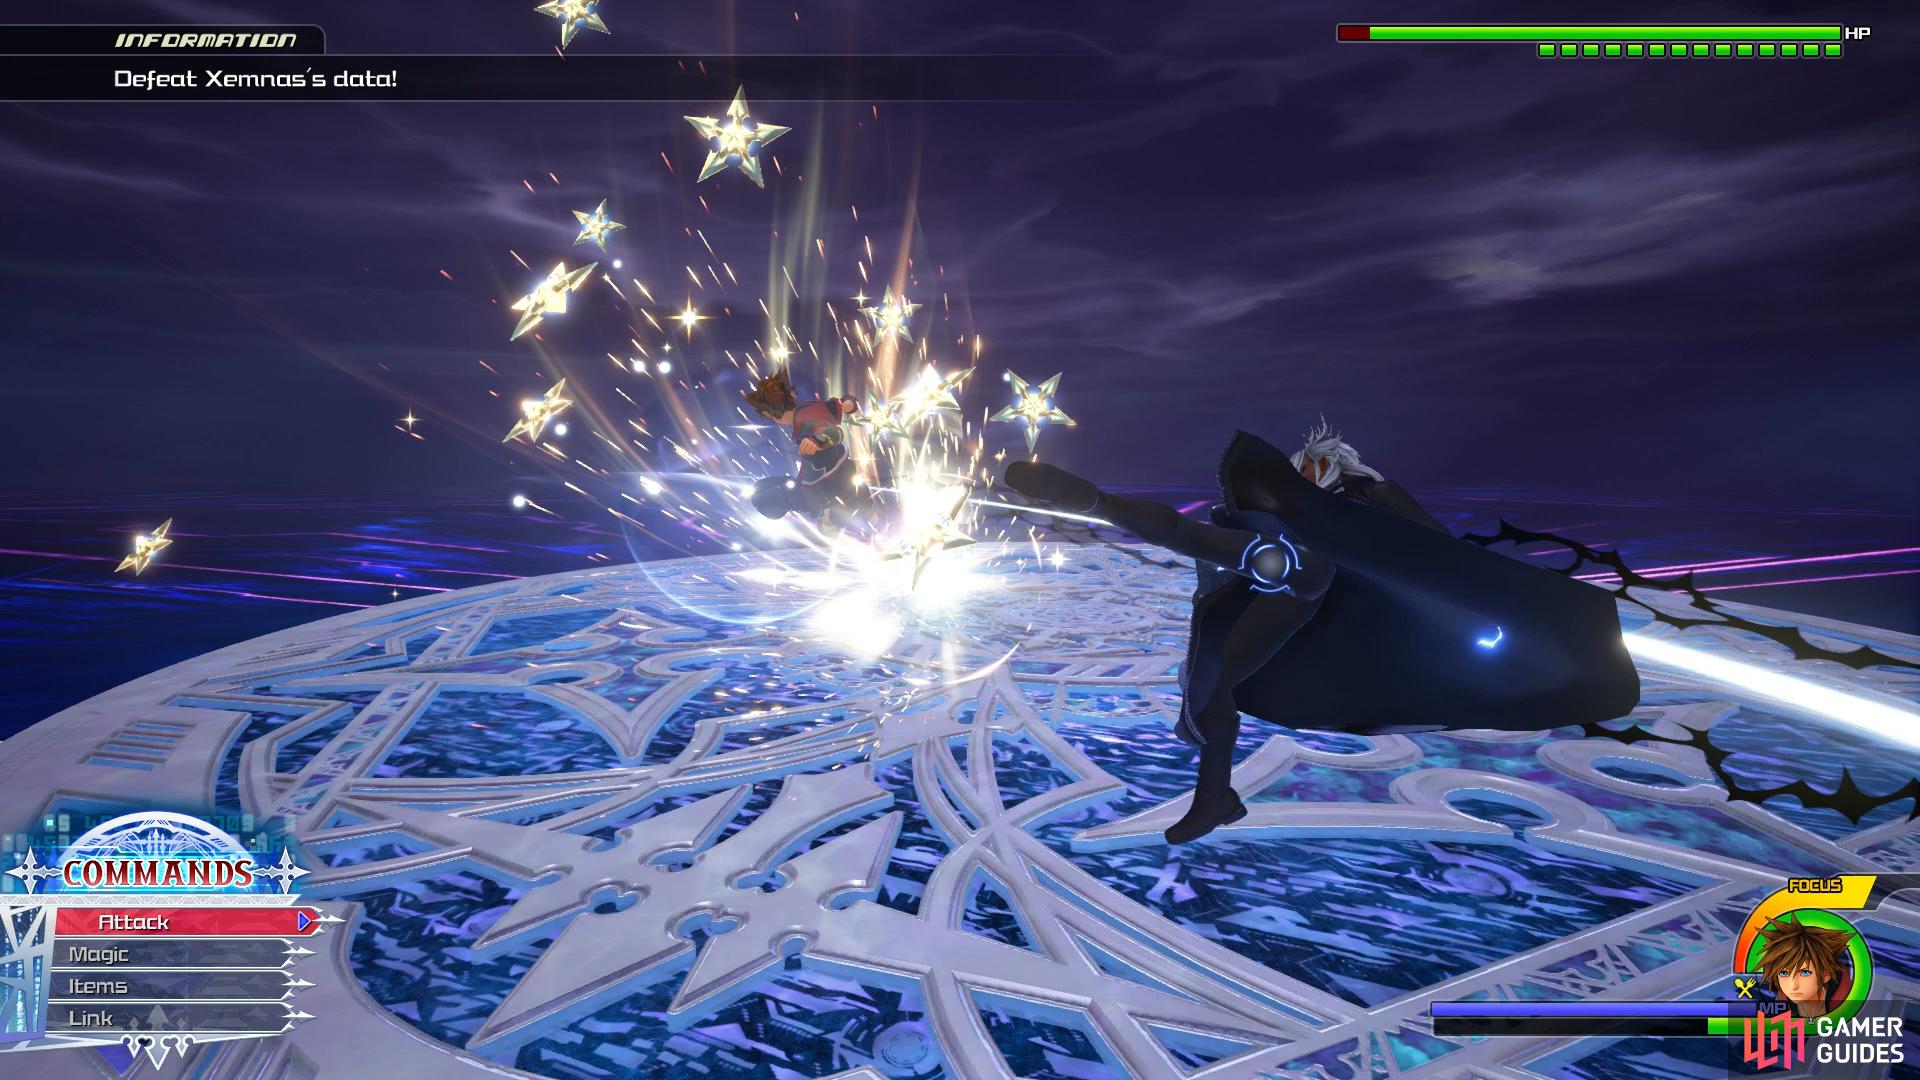 Xemnas can be countered after deflecting his combos